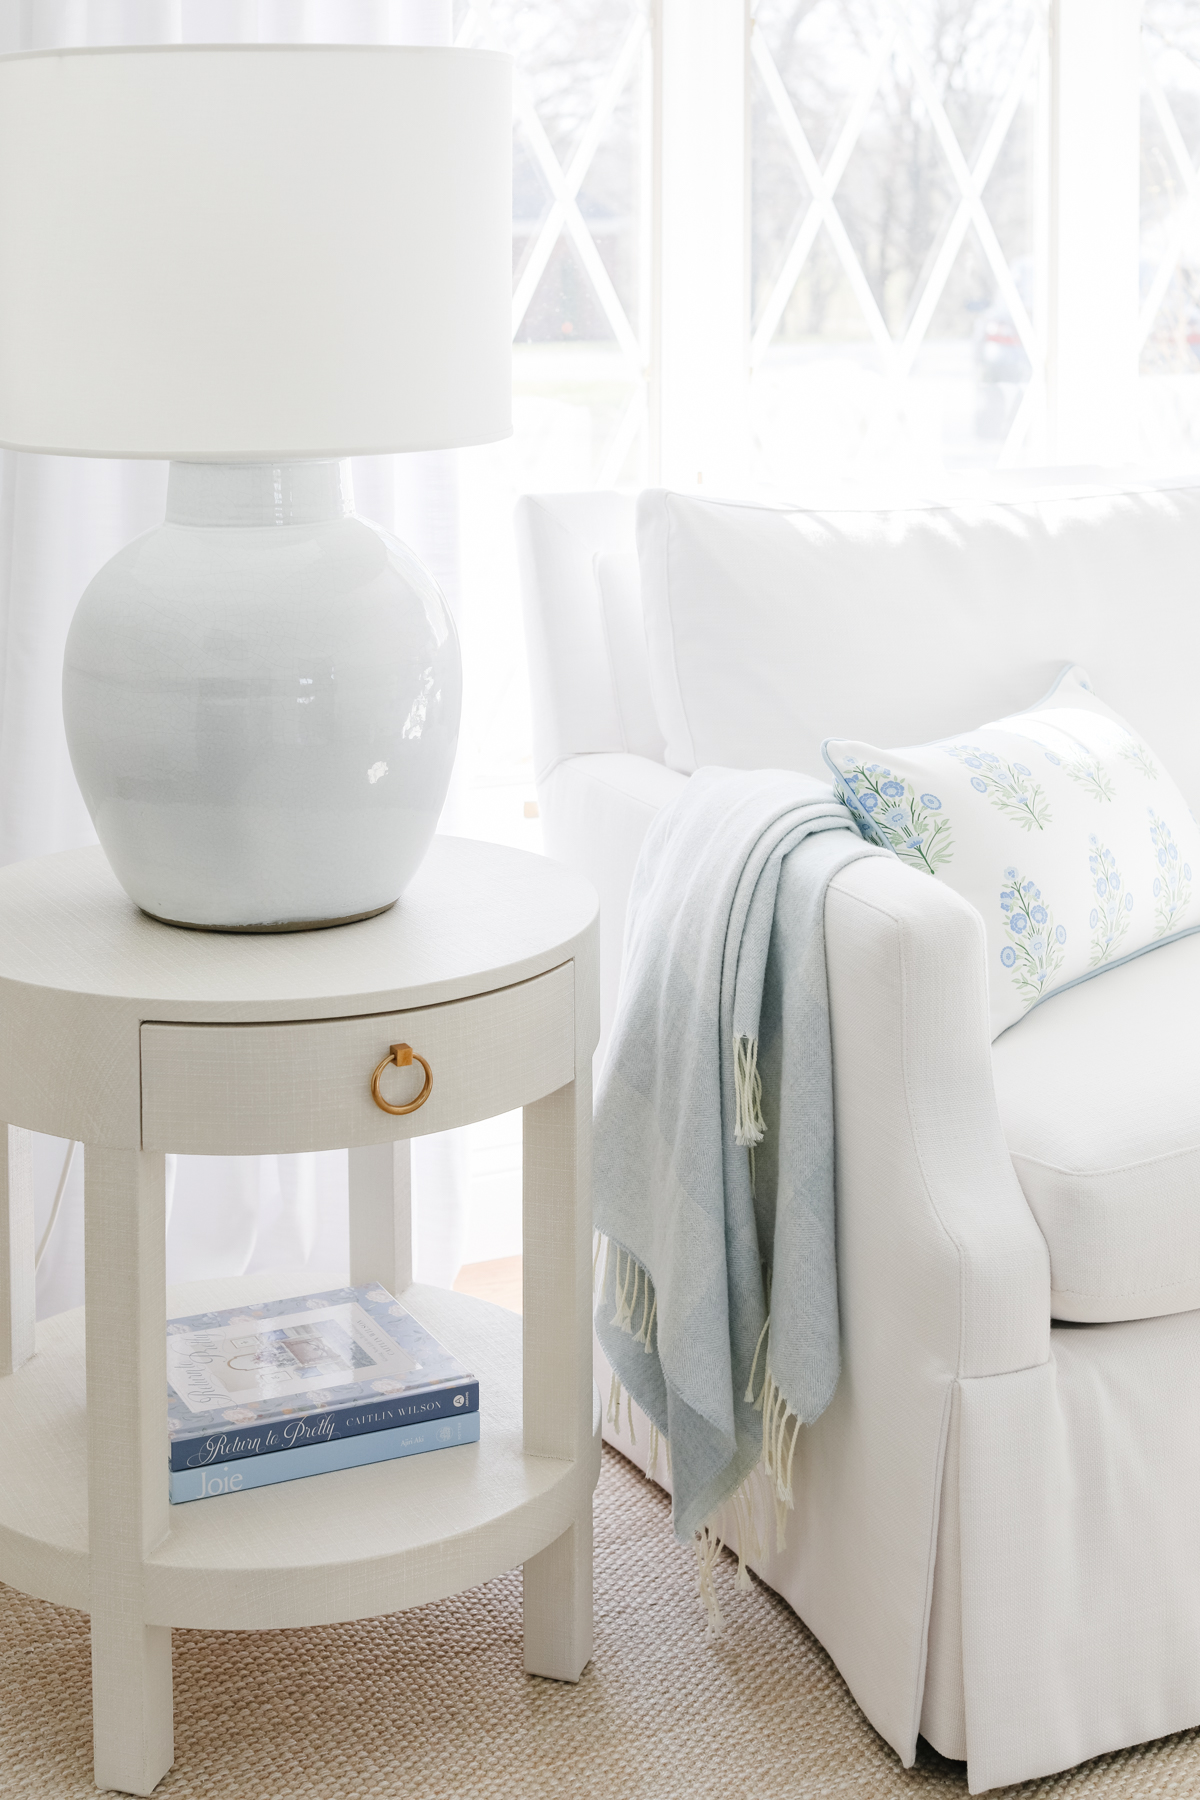 Side table with a white lamp sits next to a white sofa. Sofa has a light blue throw and floral pillow. Table holds books and is placed on a beige textured rug. Light streams in through diamond-paned windows.